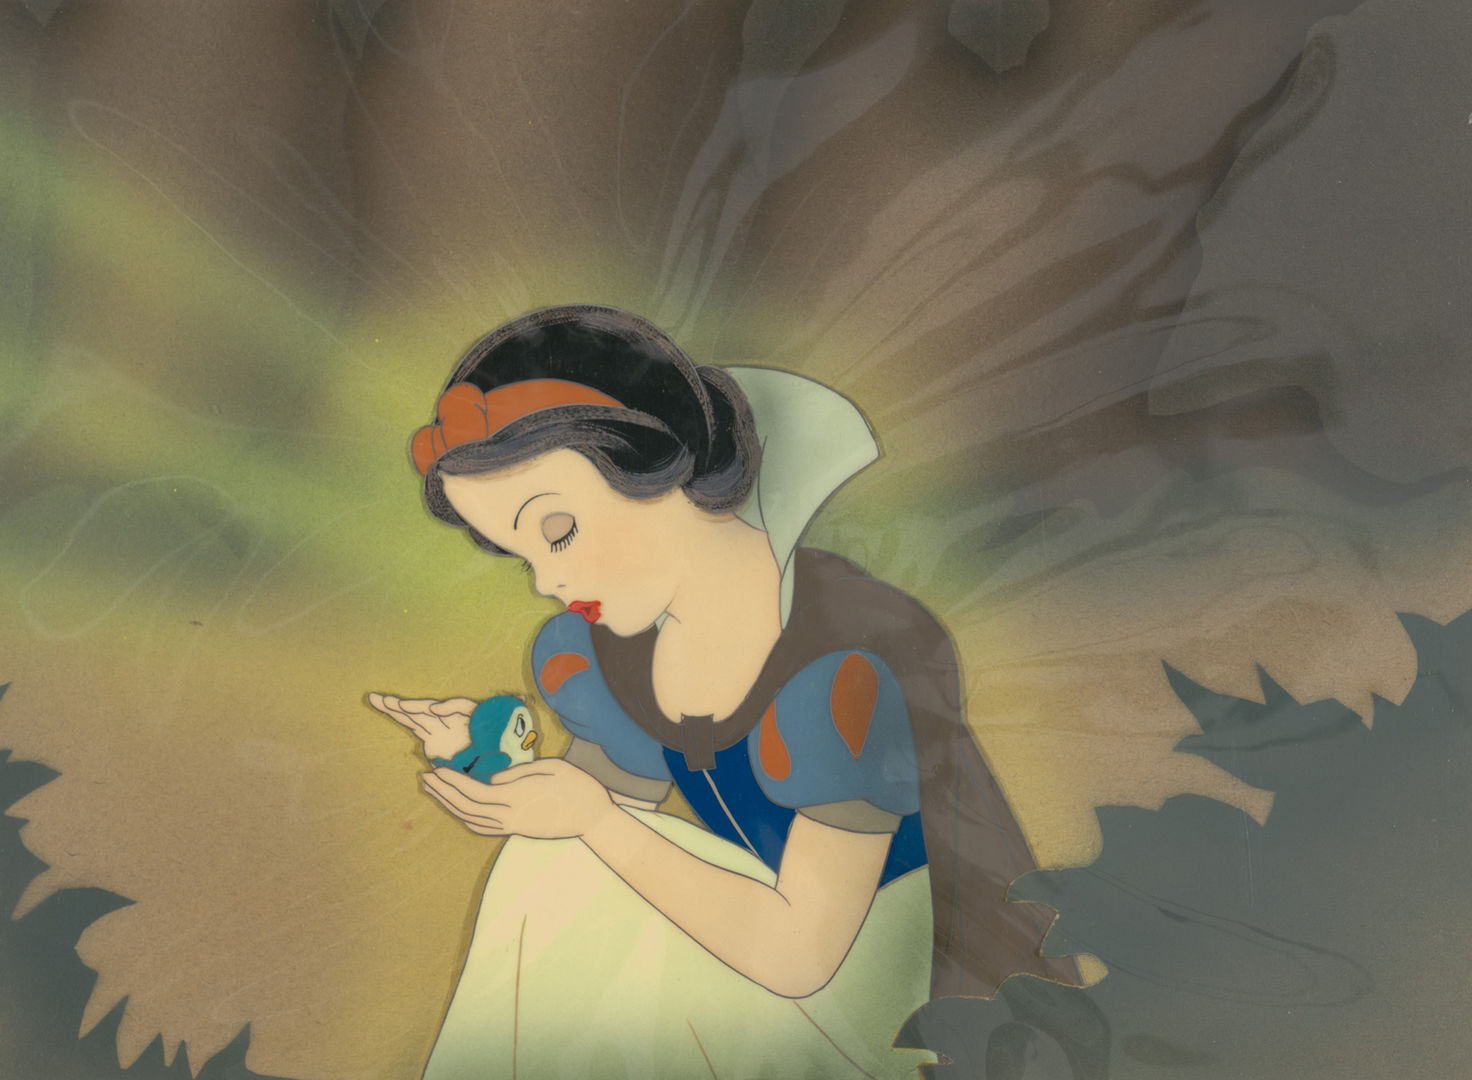 A drawing of Snow White holding a blue bird.